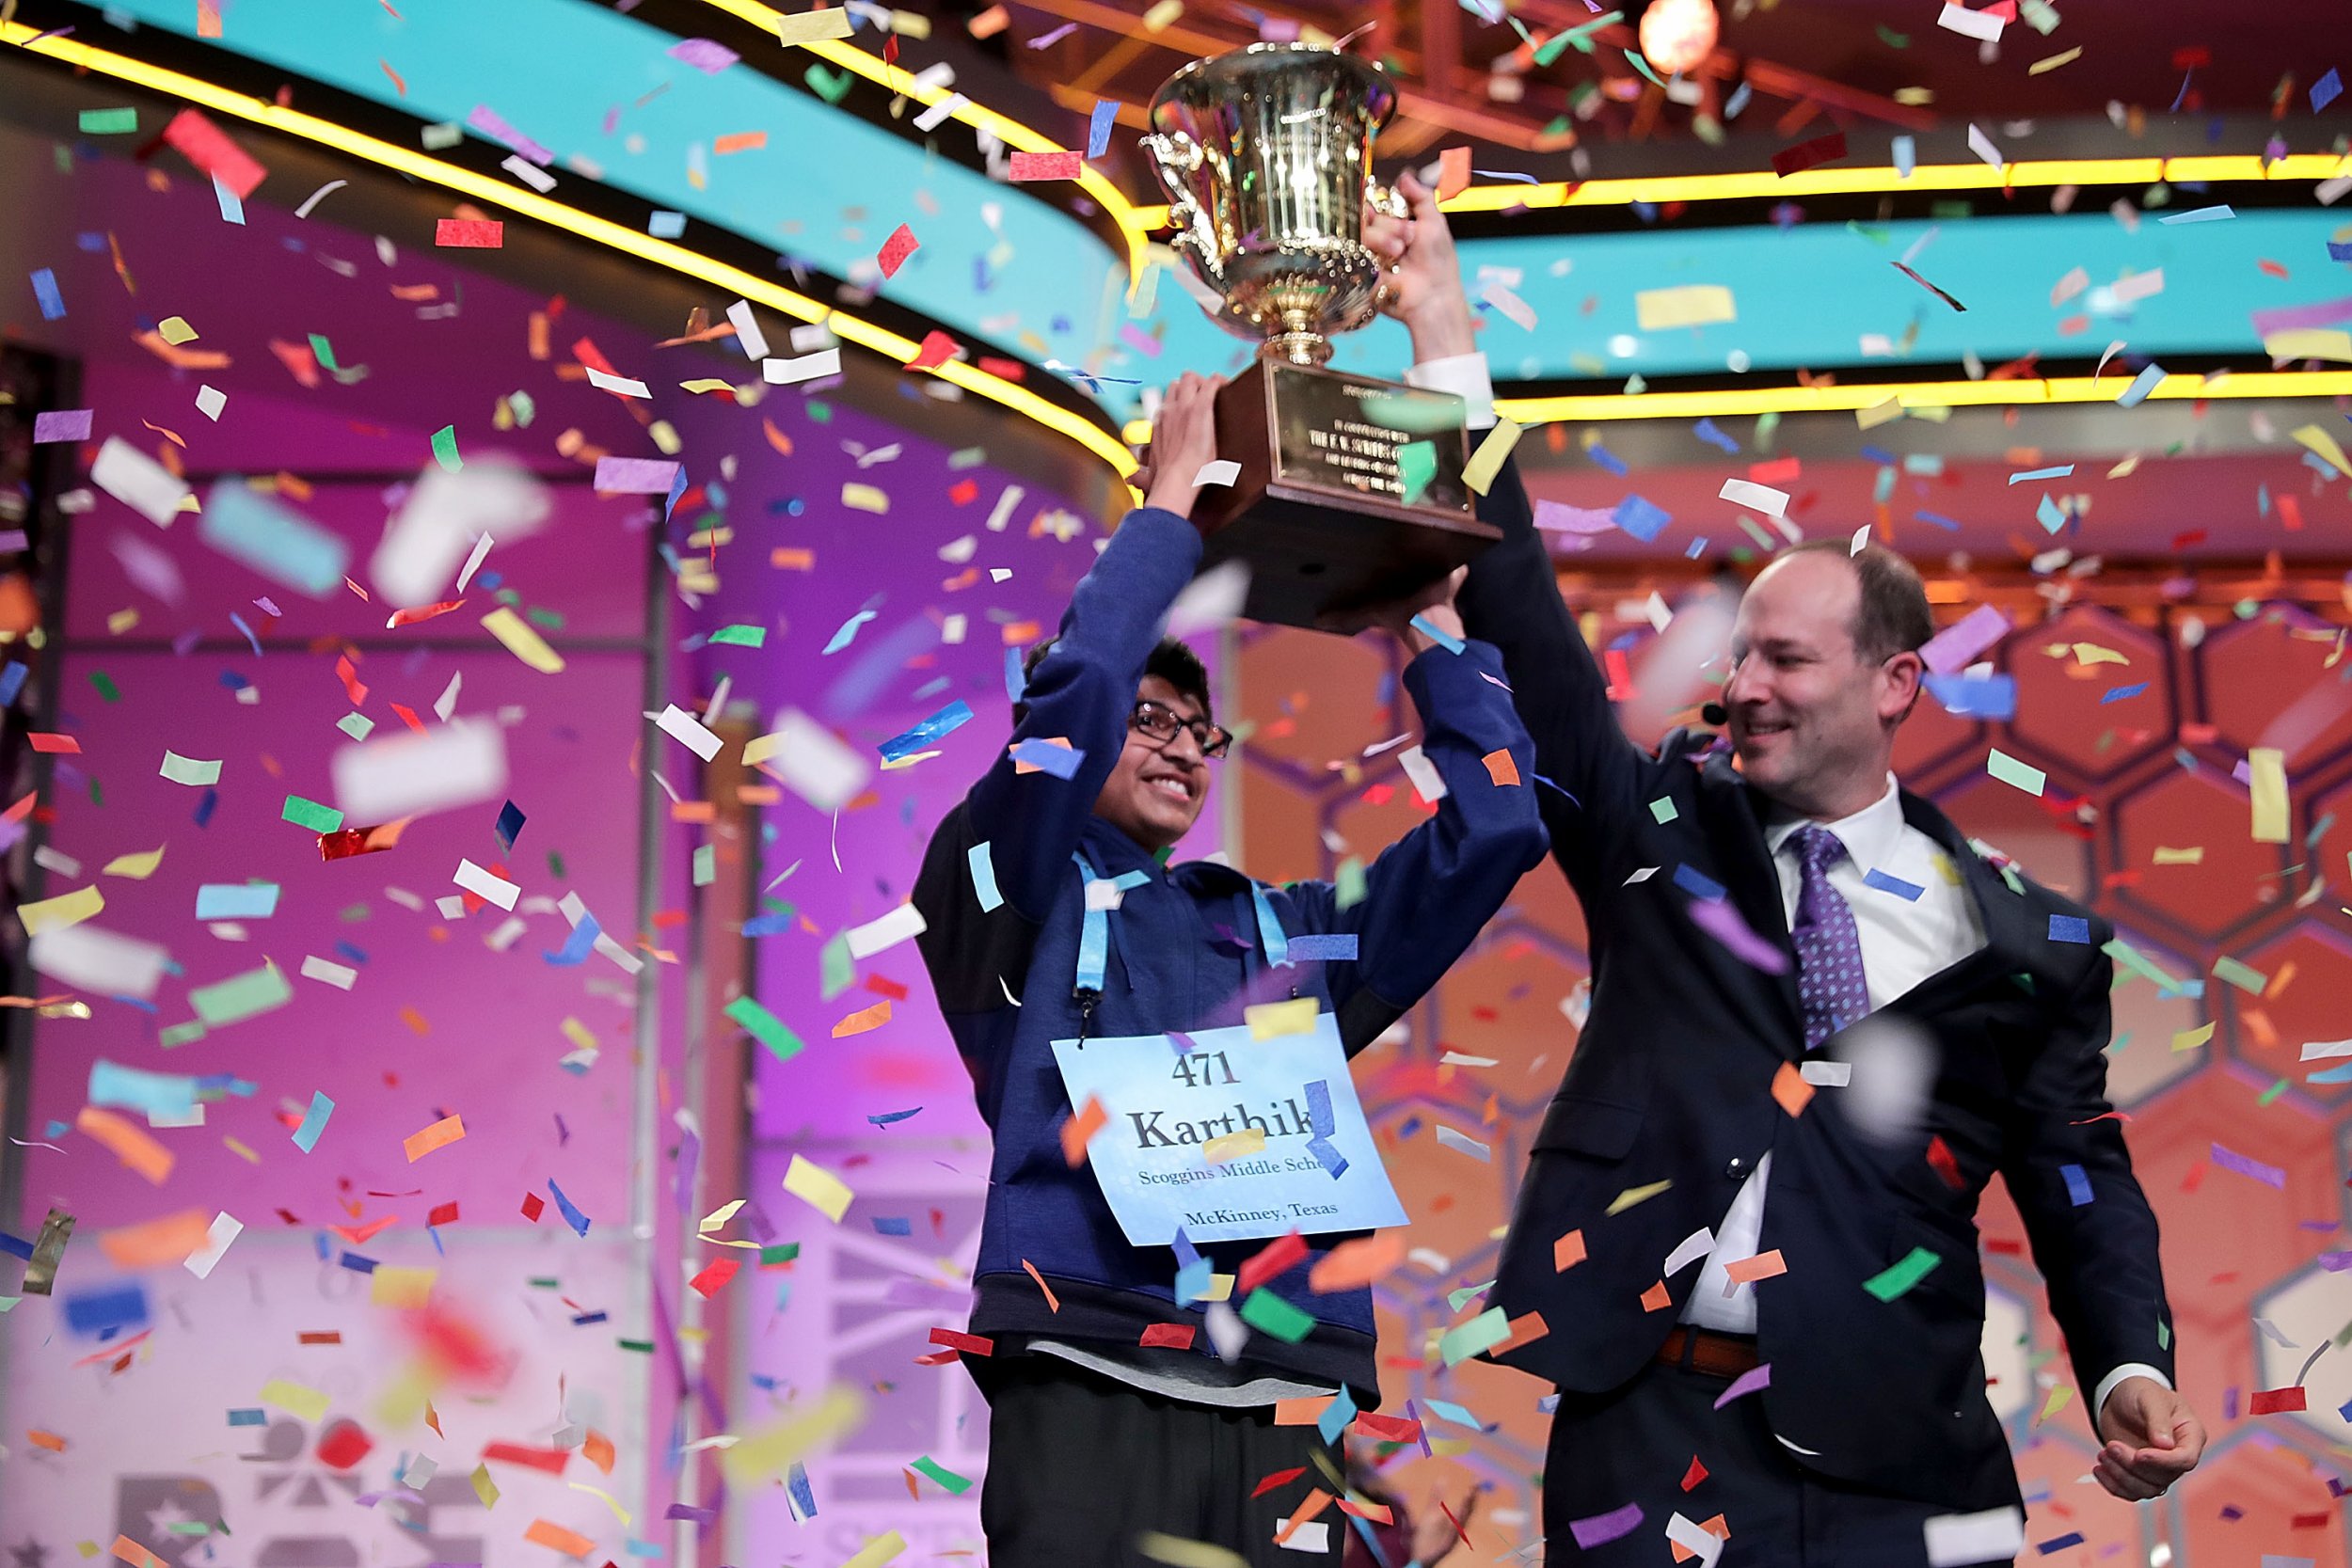 Scripps National Spelling Bee How to Watch, Live Stream the Final Round